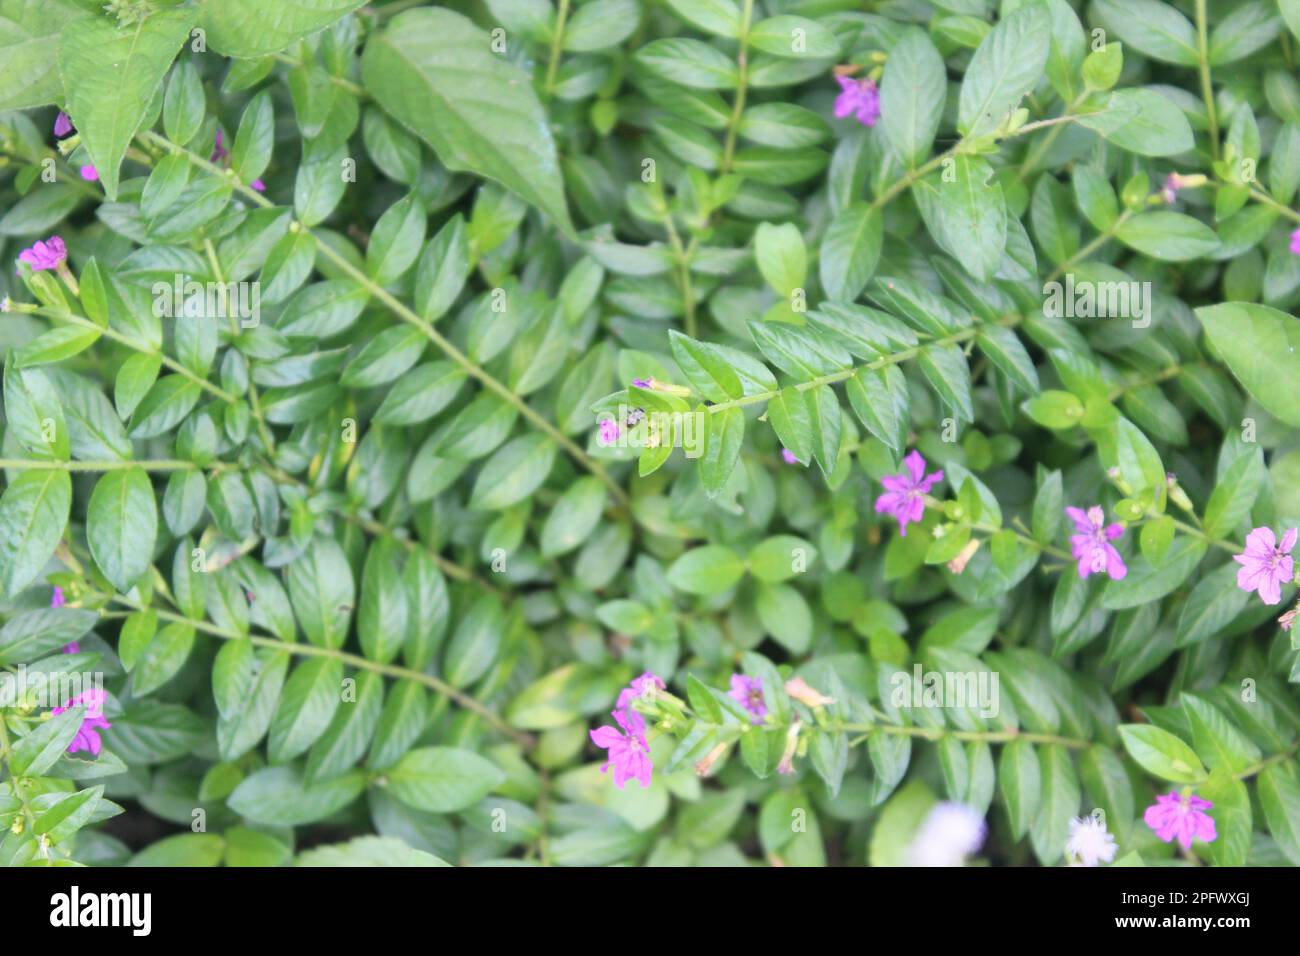 beautiful Taiwan beauty flower (Cuphea hyssopifolia) with green leaves Stock Photo